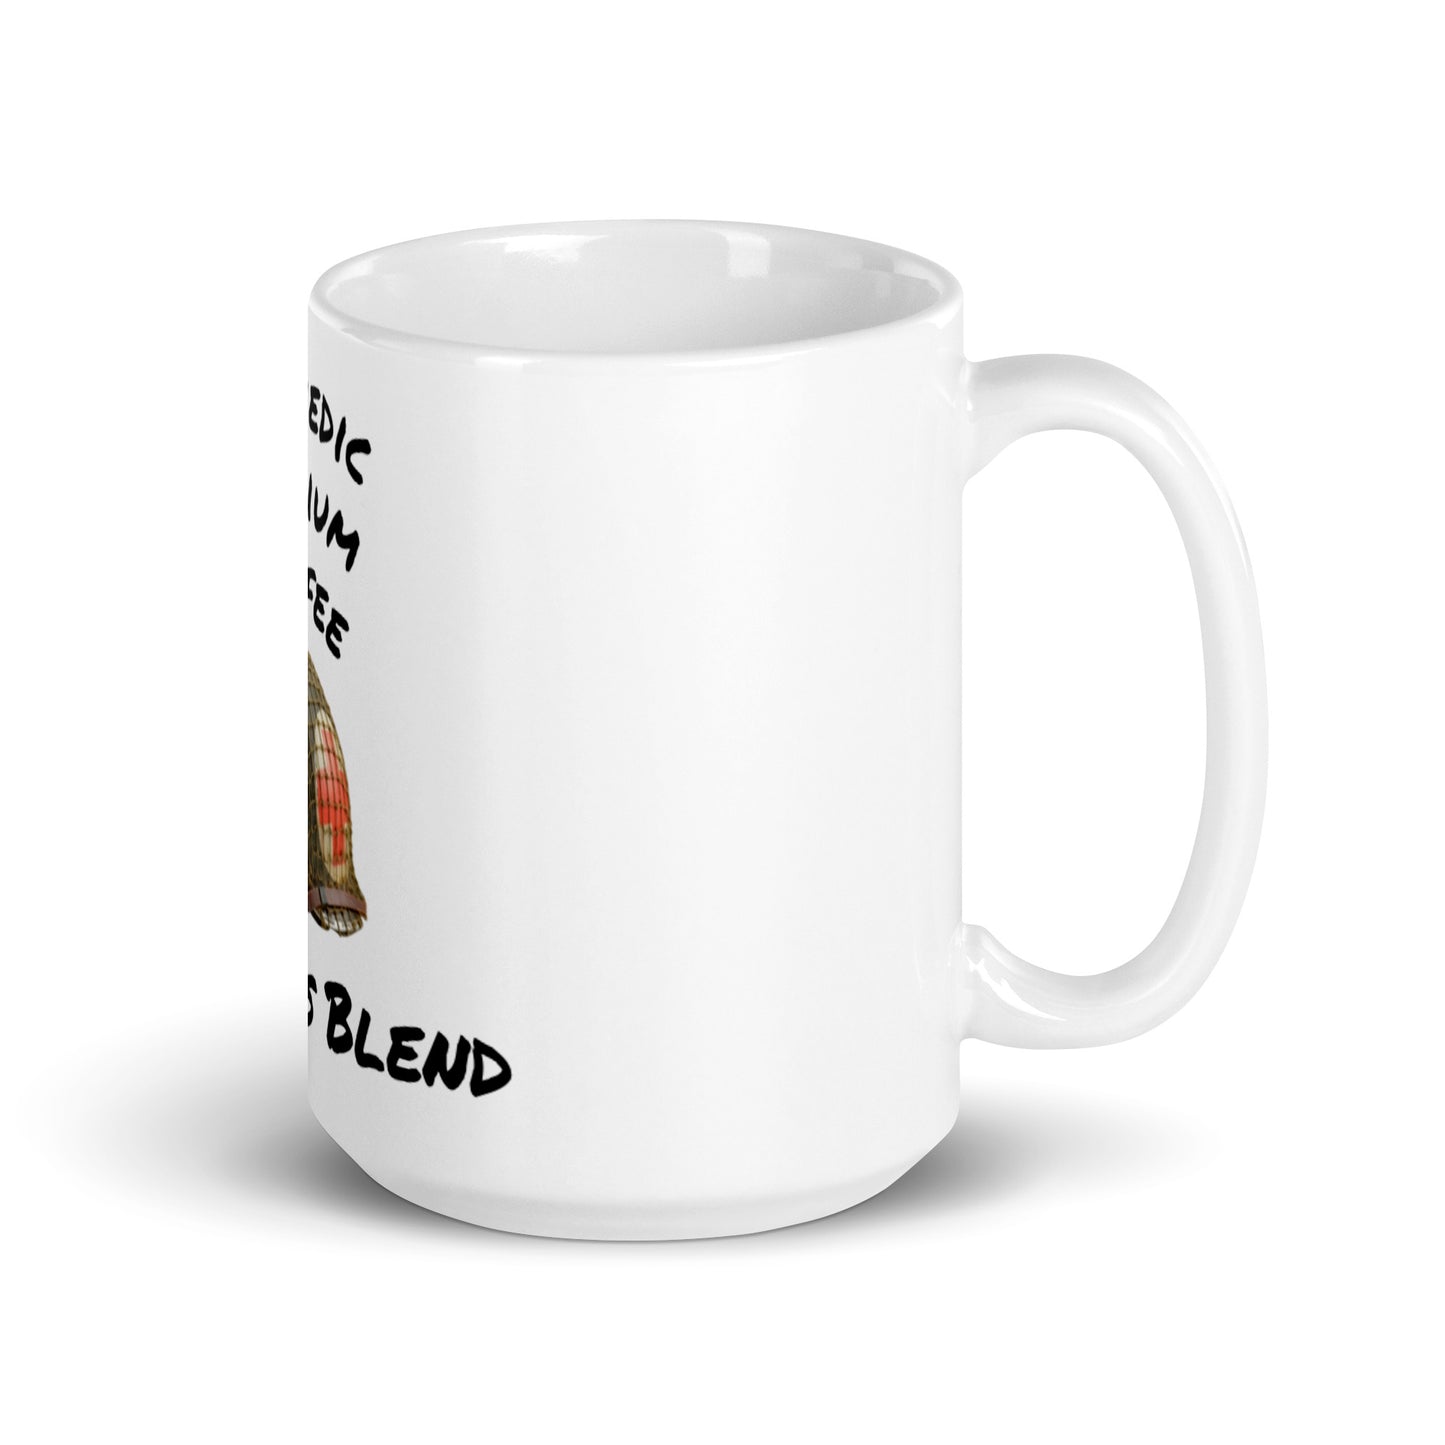 Valerie's Blend Coffee Cup